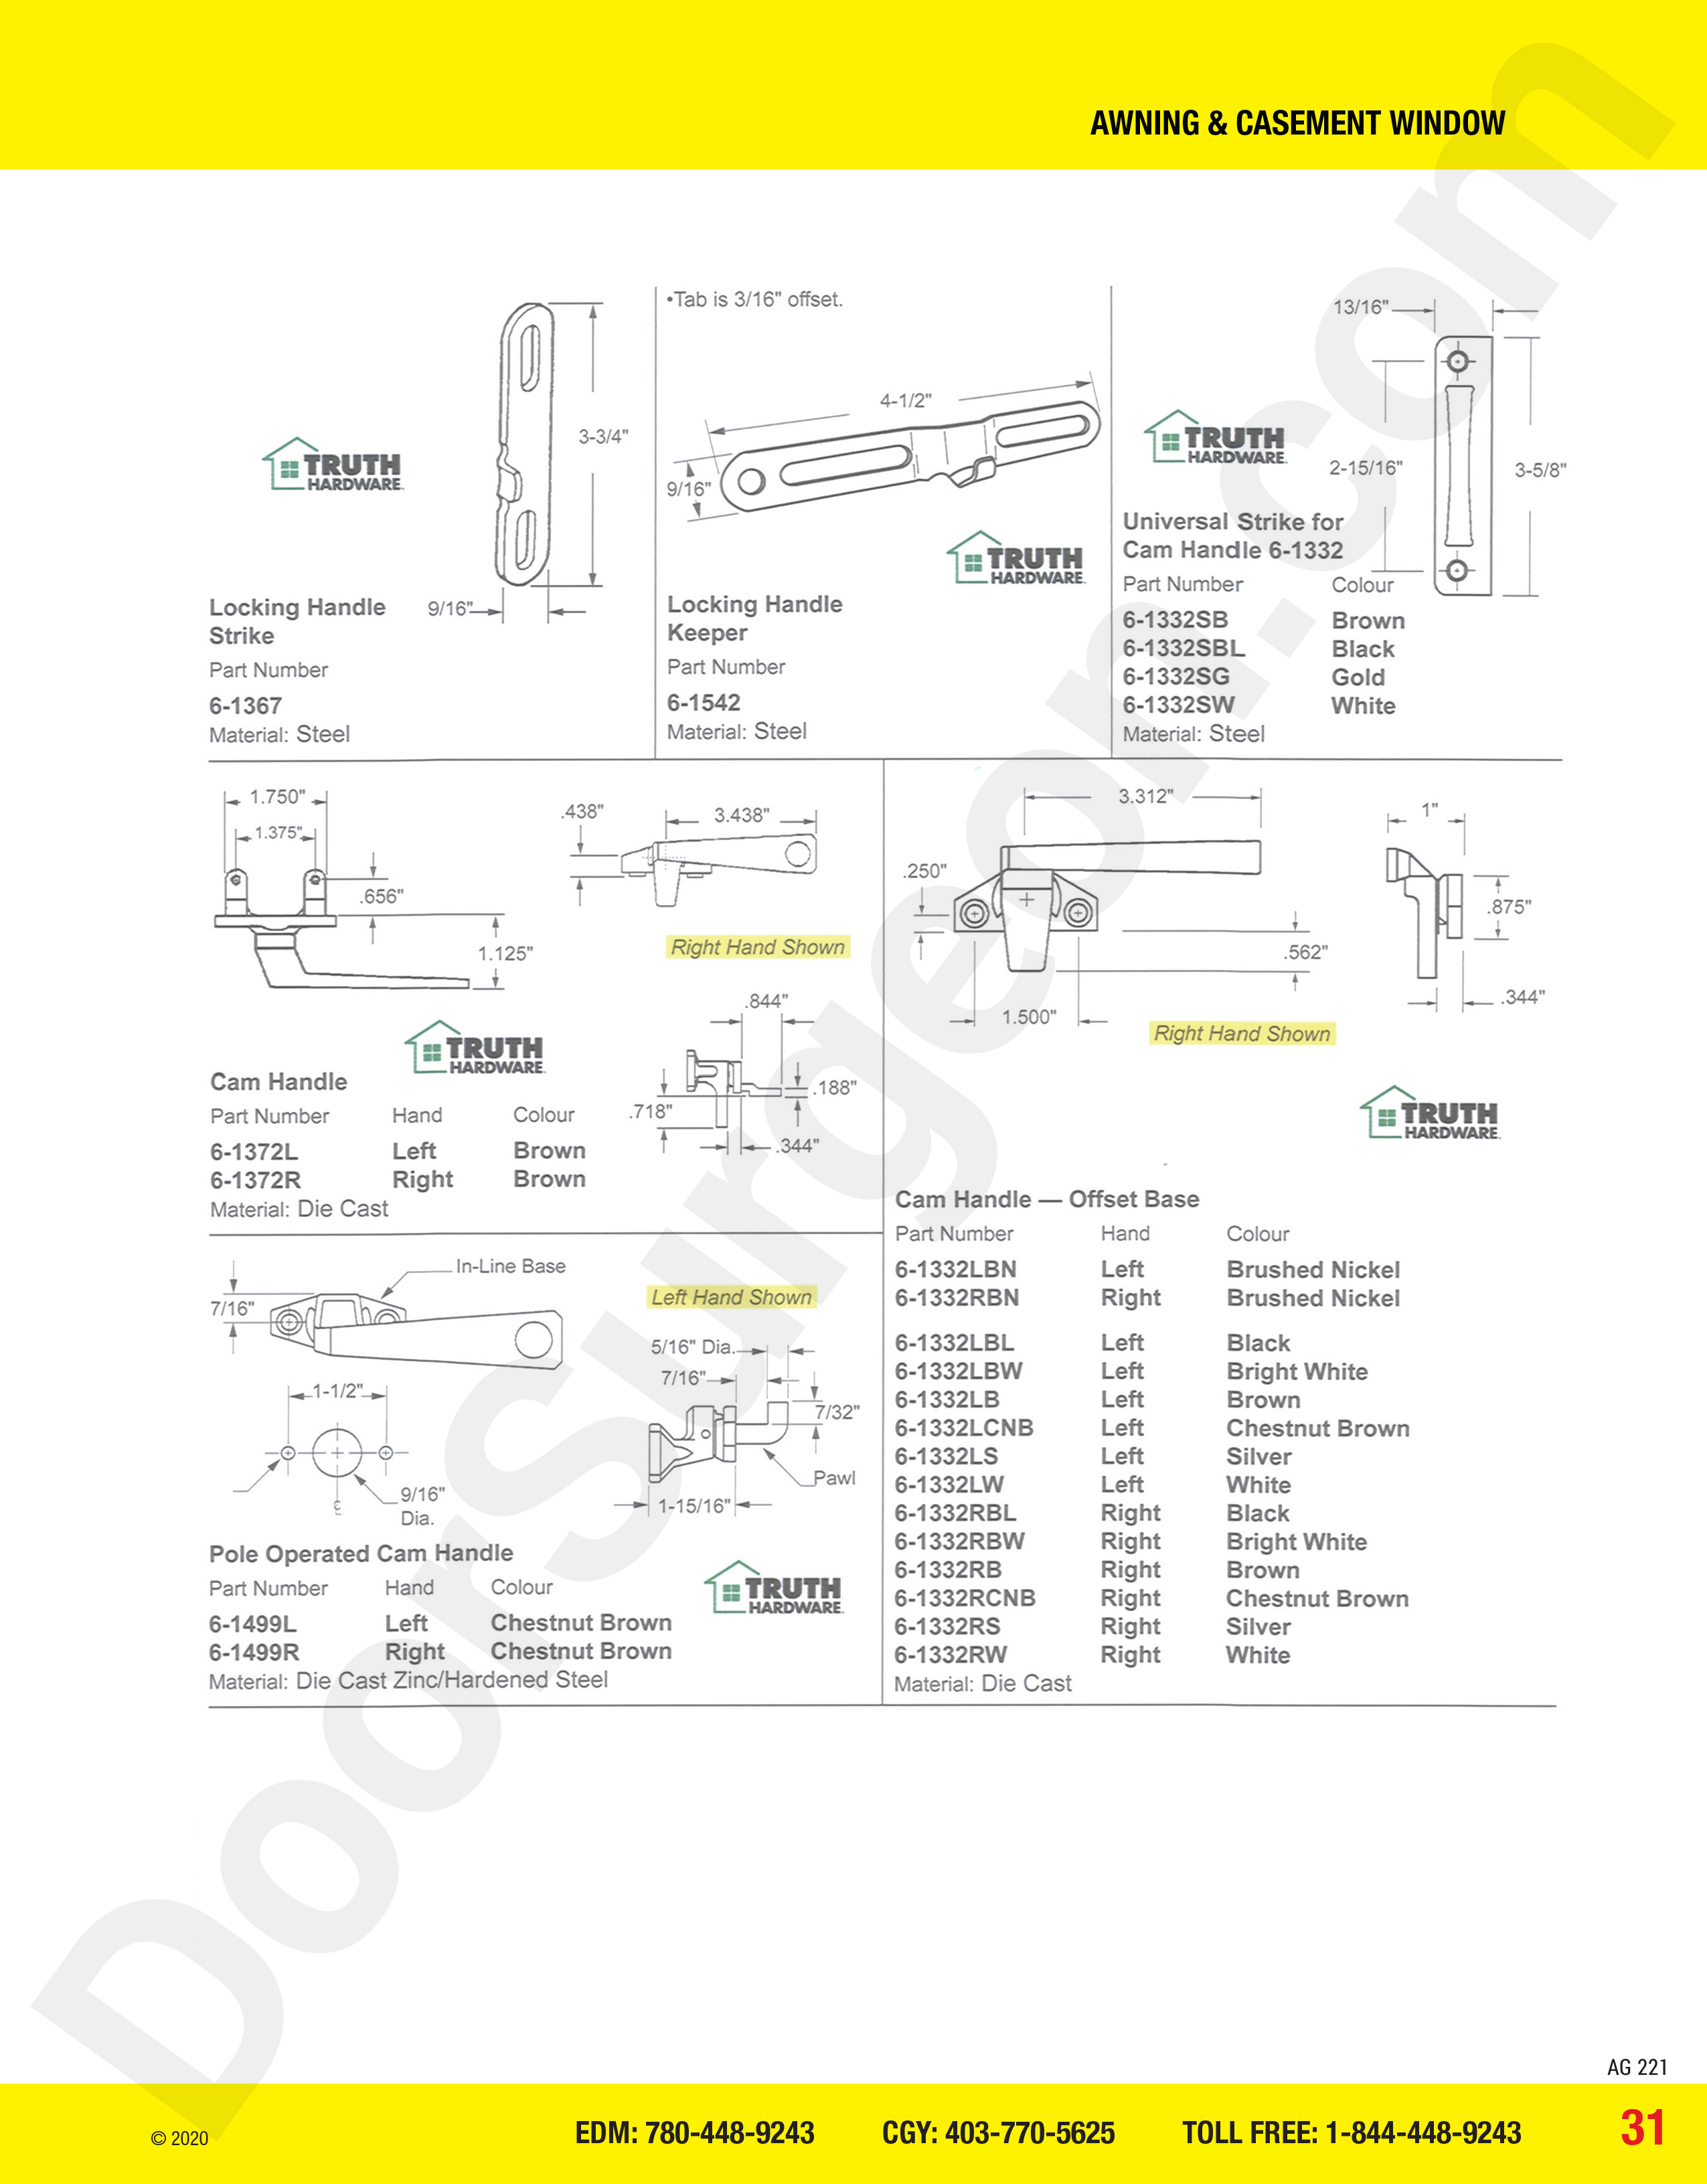 awning and casement window parts for cam handles